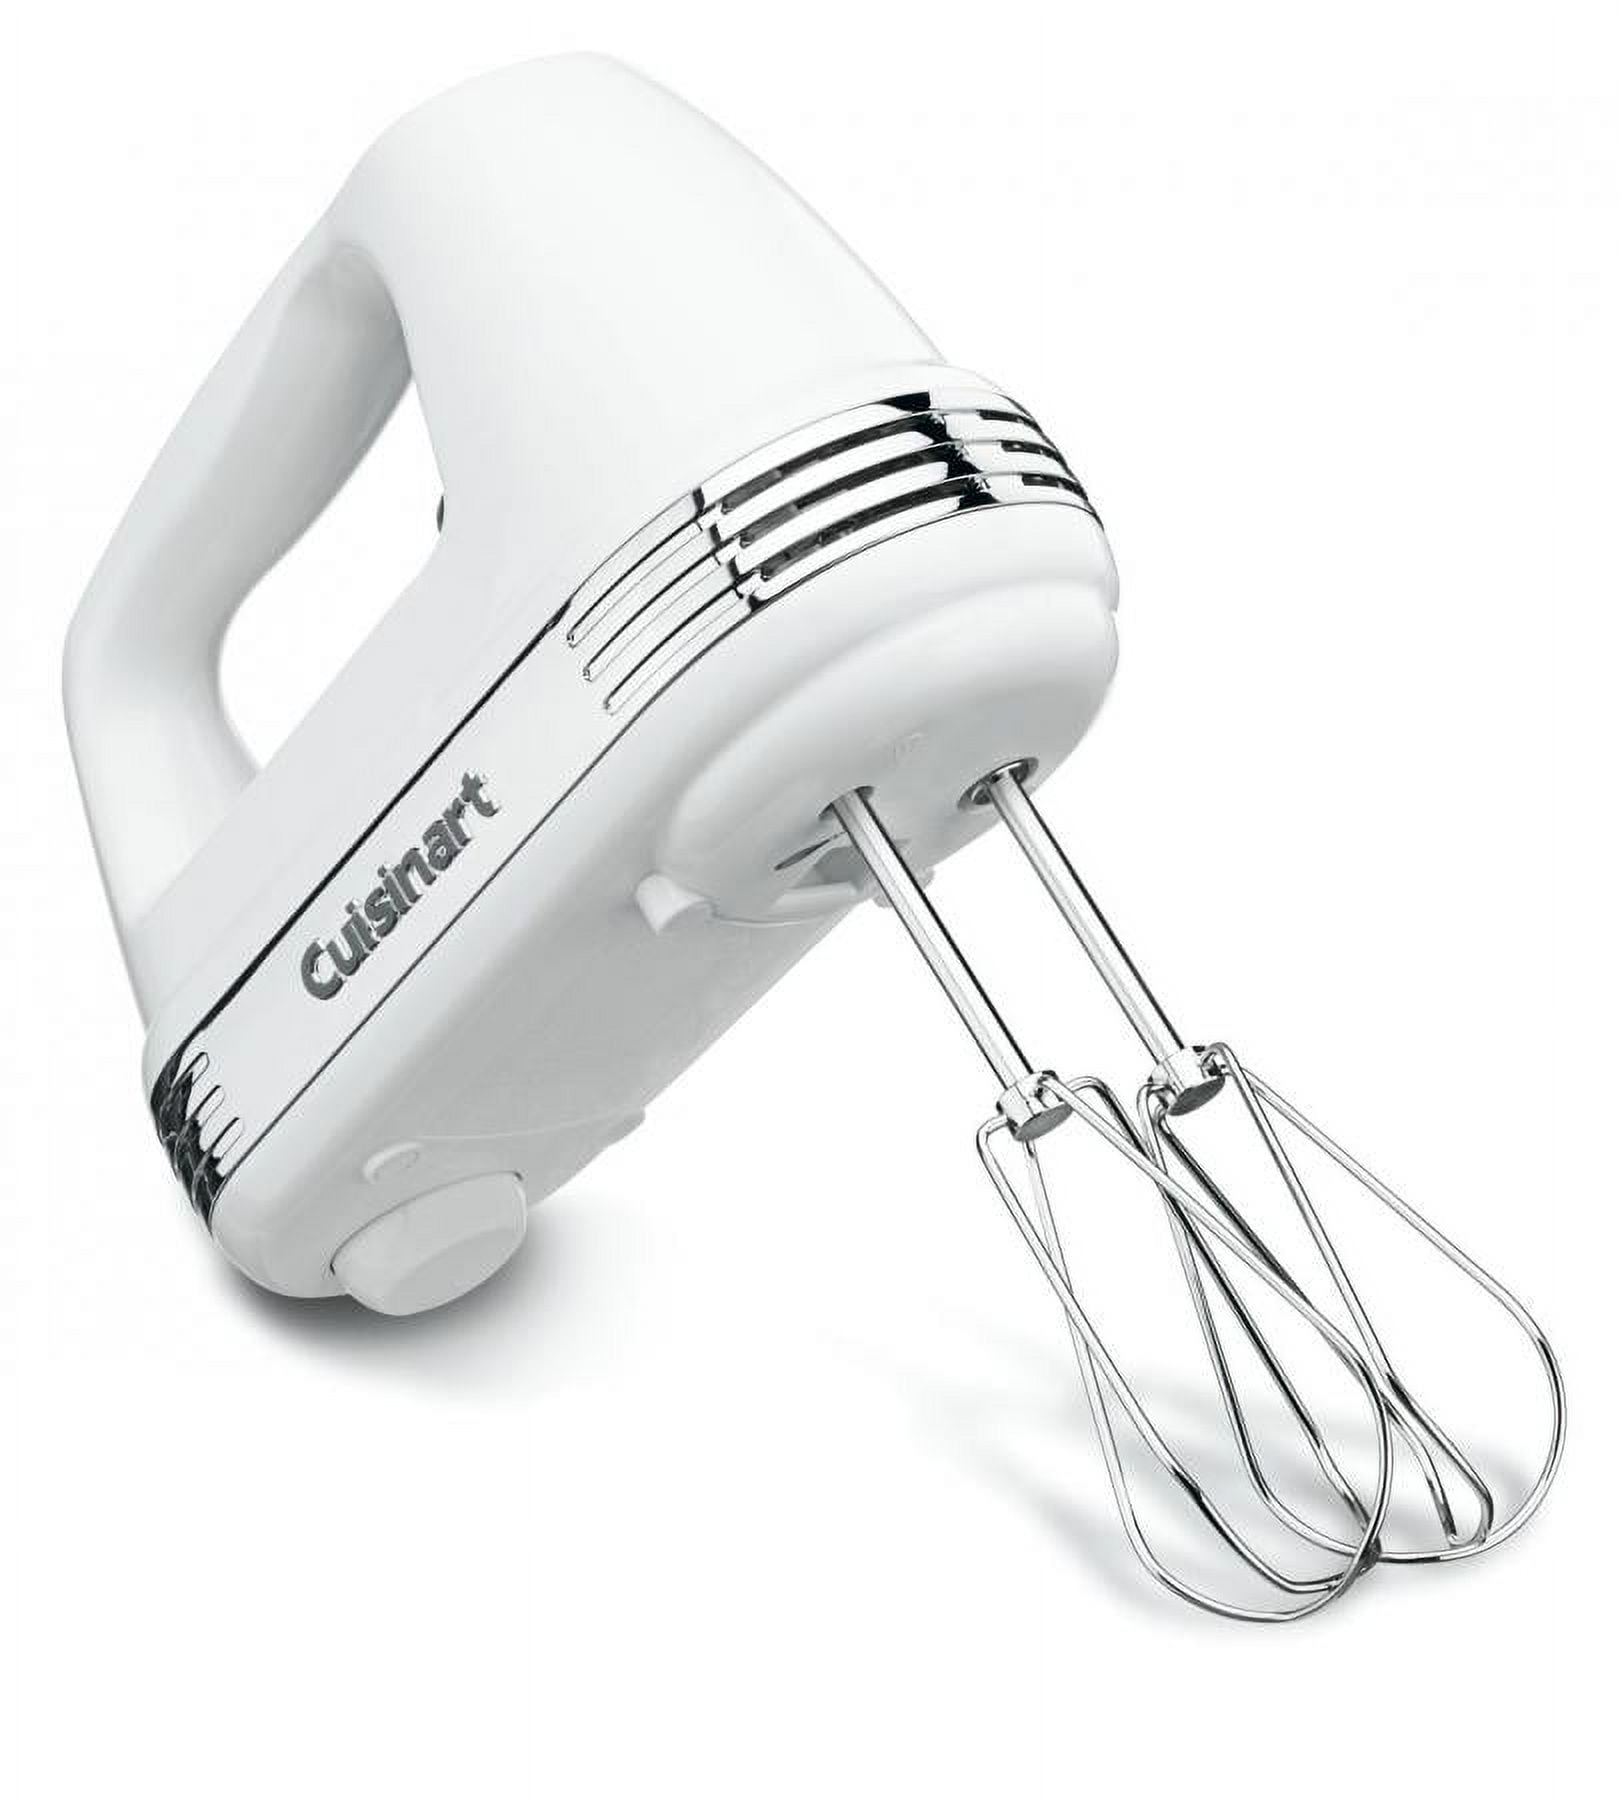 Cuisinart Power Advantage Plus 9-Speed Mixer in Brushed Chrome - 9236524